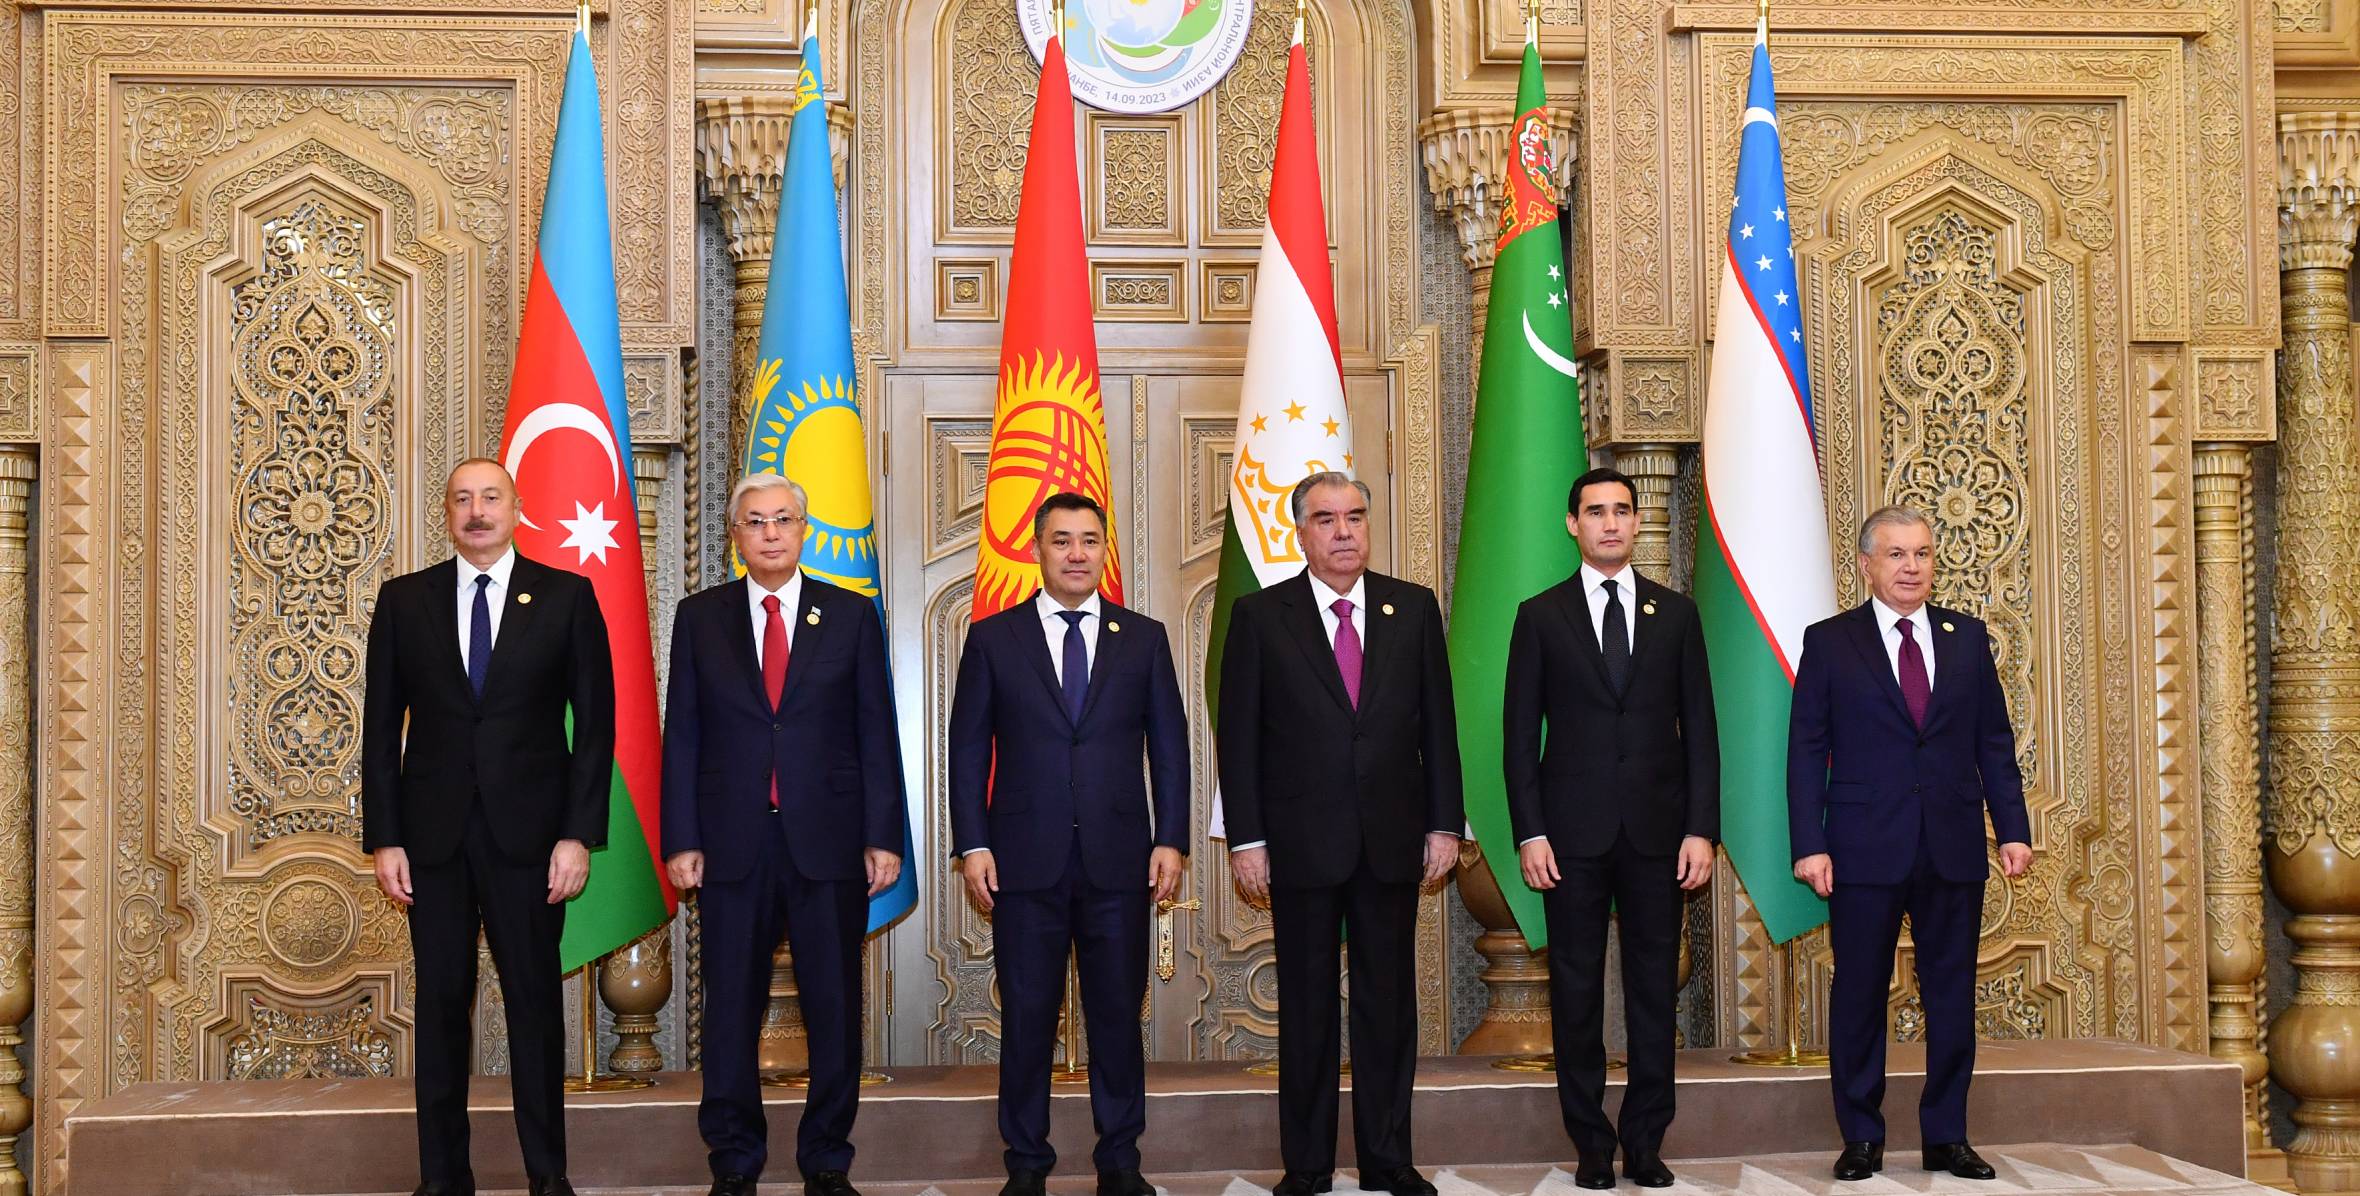 Ilham Aliyev participated in the 5th Consultative Meeting of Heads of Central Asian States